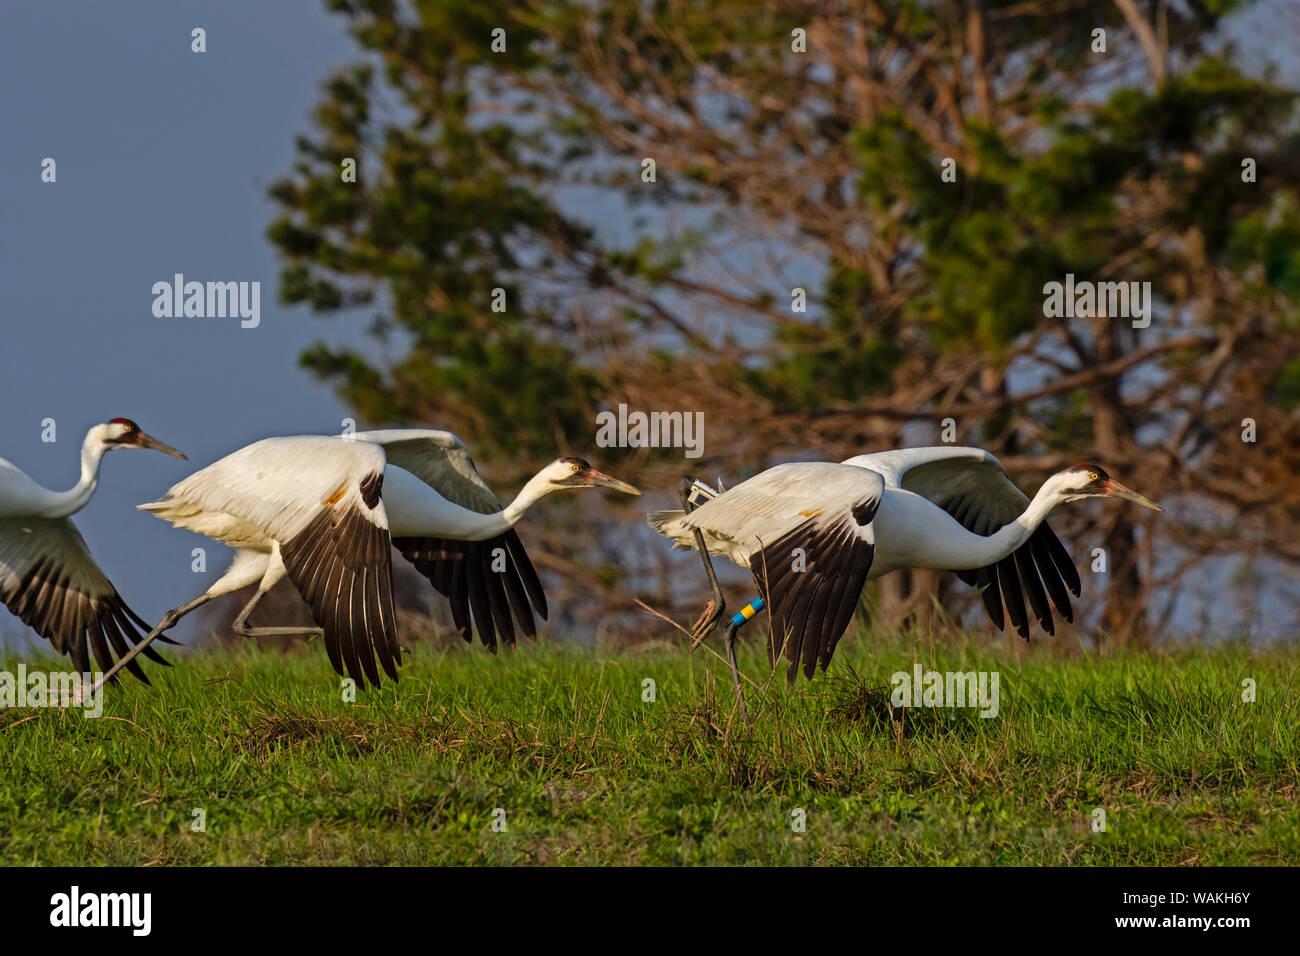 Whooping cranes (Grus americana) adult group at takeoff. Stock Photo